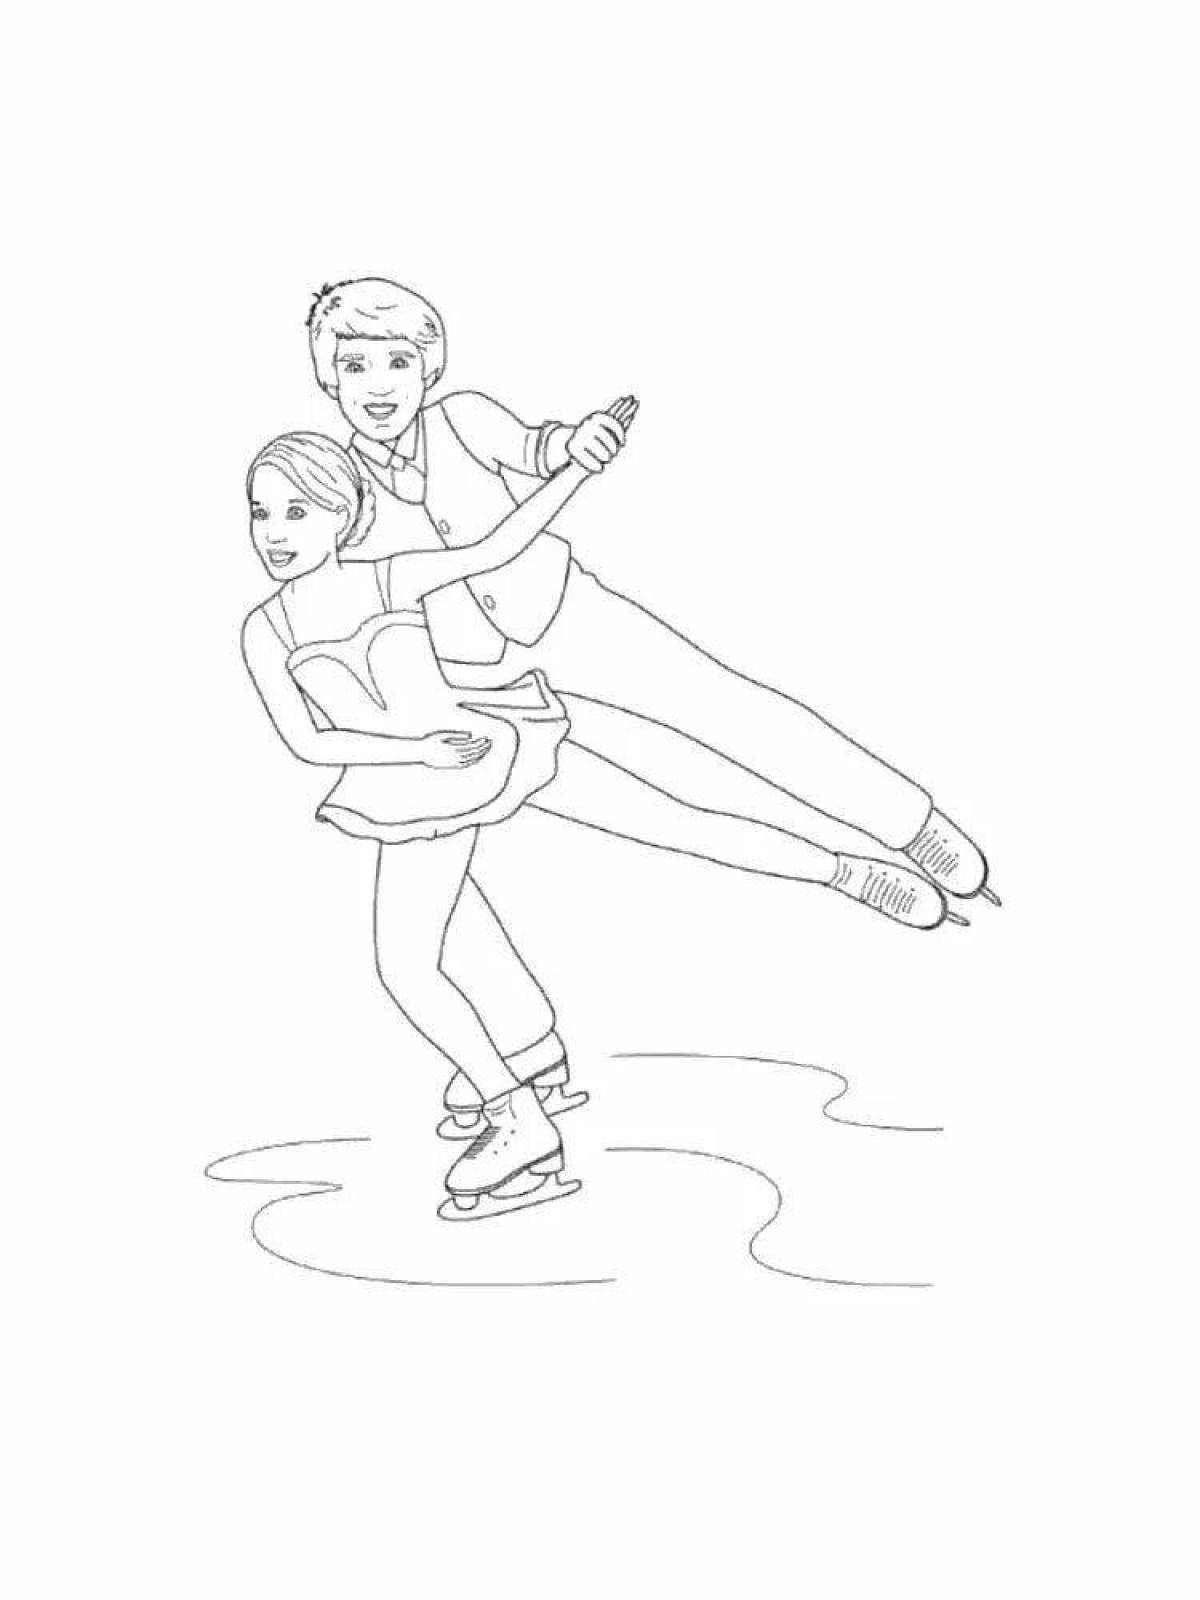 Amazing figure skater coloring page for kids